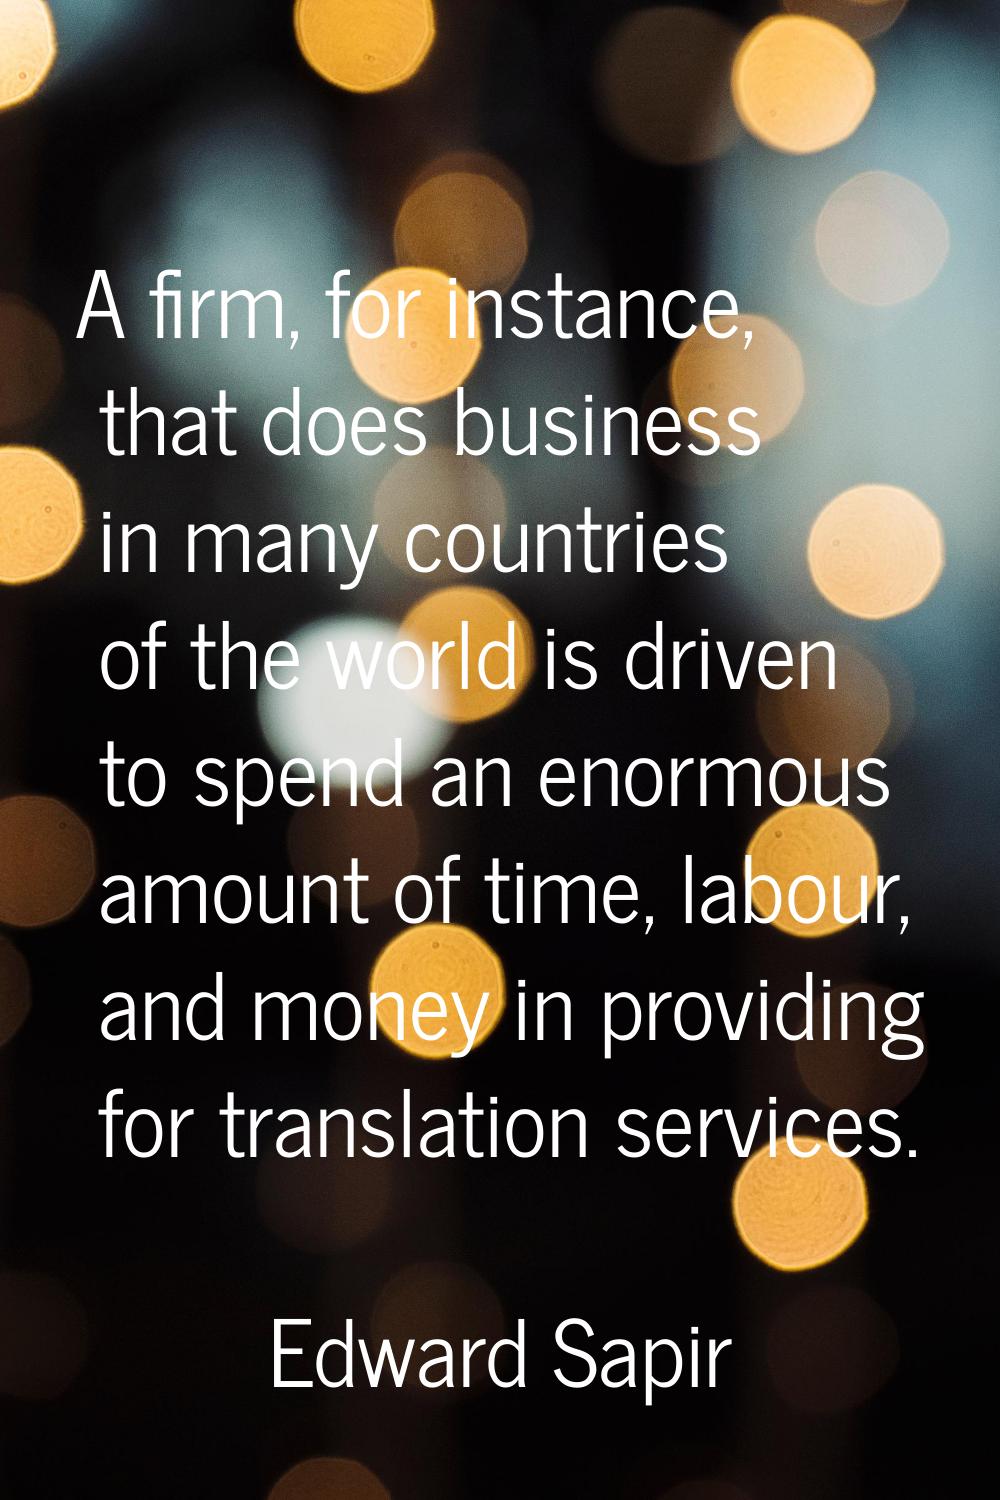 A firm, for instance, that does business in many countries of the world is driven to spend an enorm